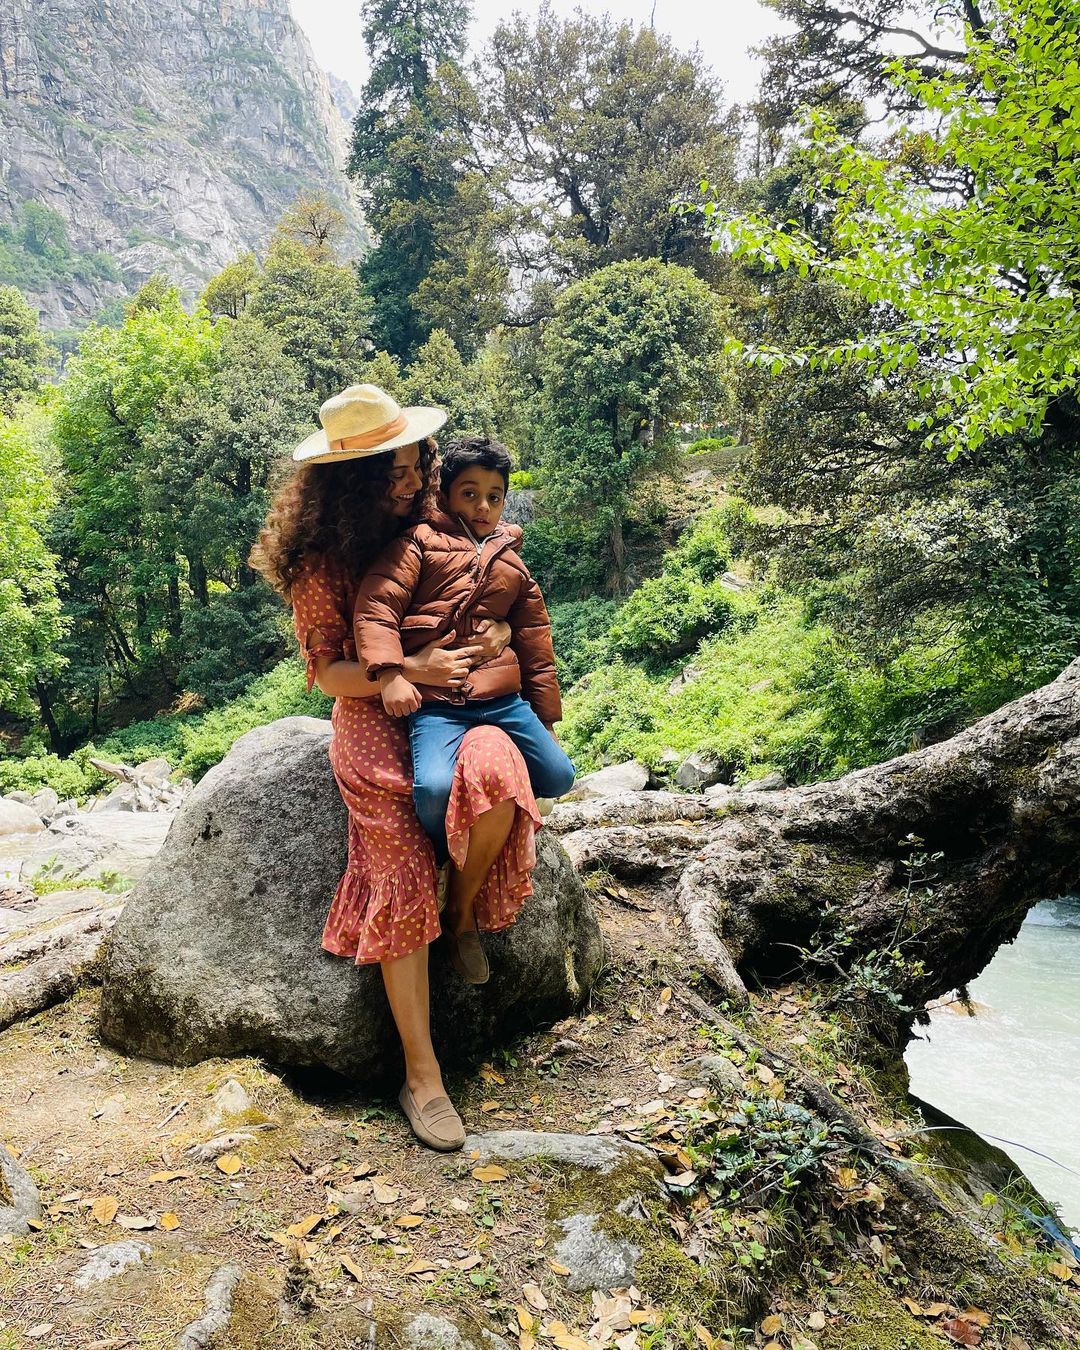 Kangana Ranaut plays the perfect aunt as she poses with her nephew. 